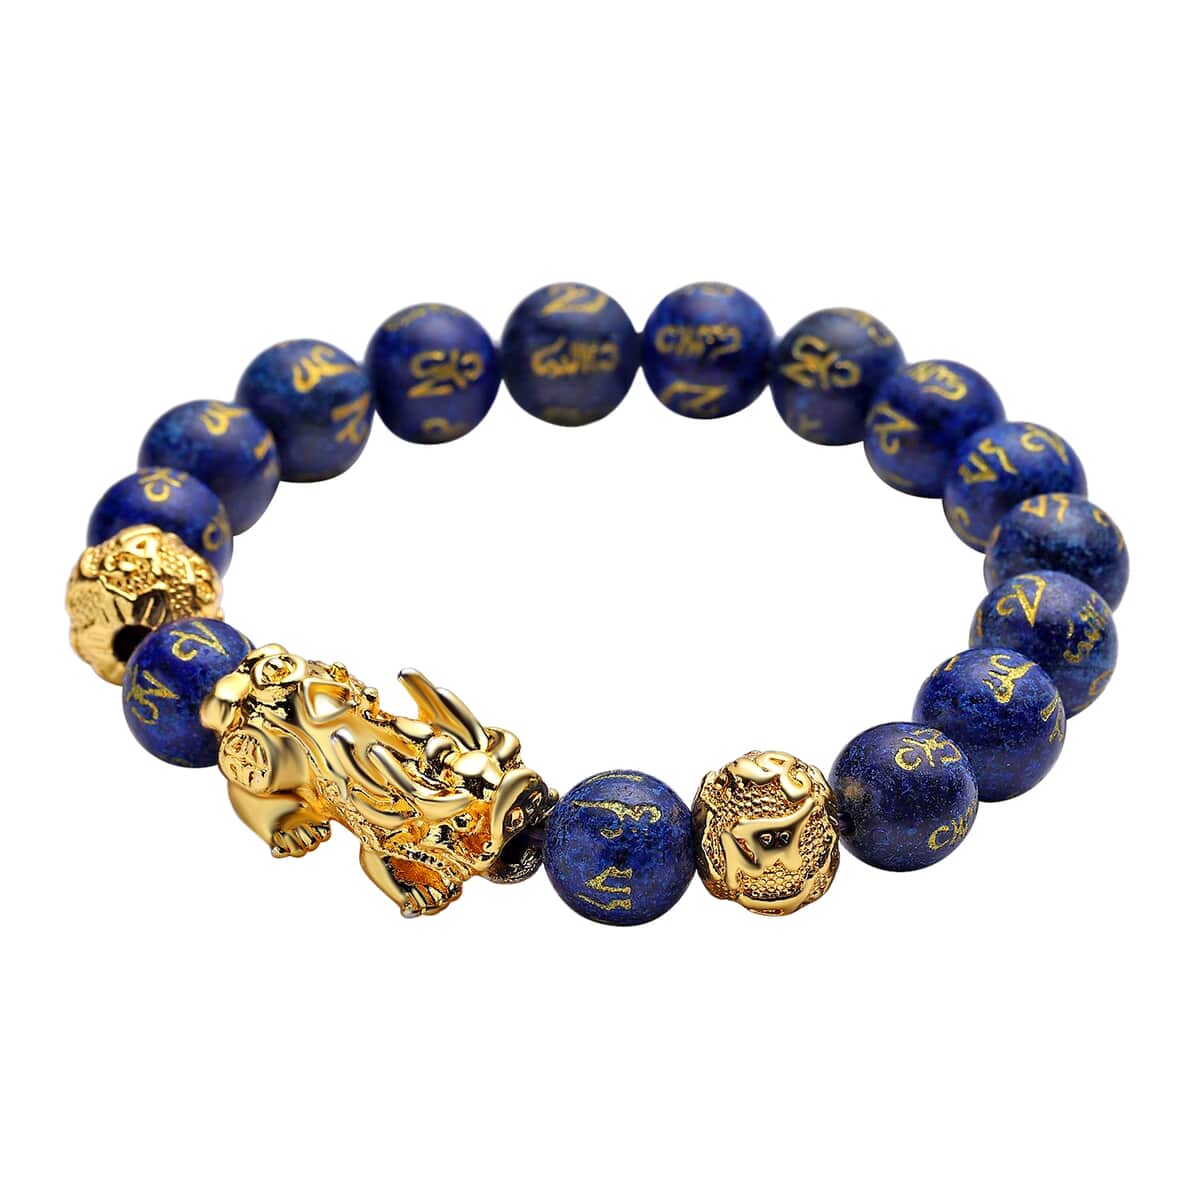 Feng Shui Pixiu Charm Lapis Lazuli Carved Beads Stretch Bracelet in Goldtone, Stretchable Bracelet, Good Luck Birthday Gift 128.00 ctw image number 3